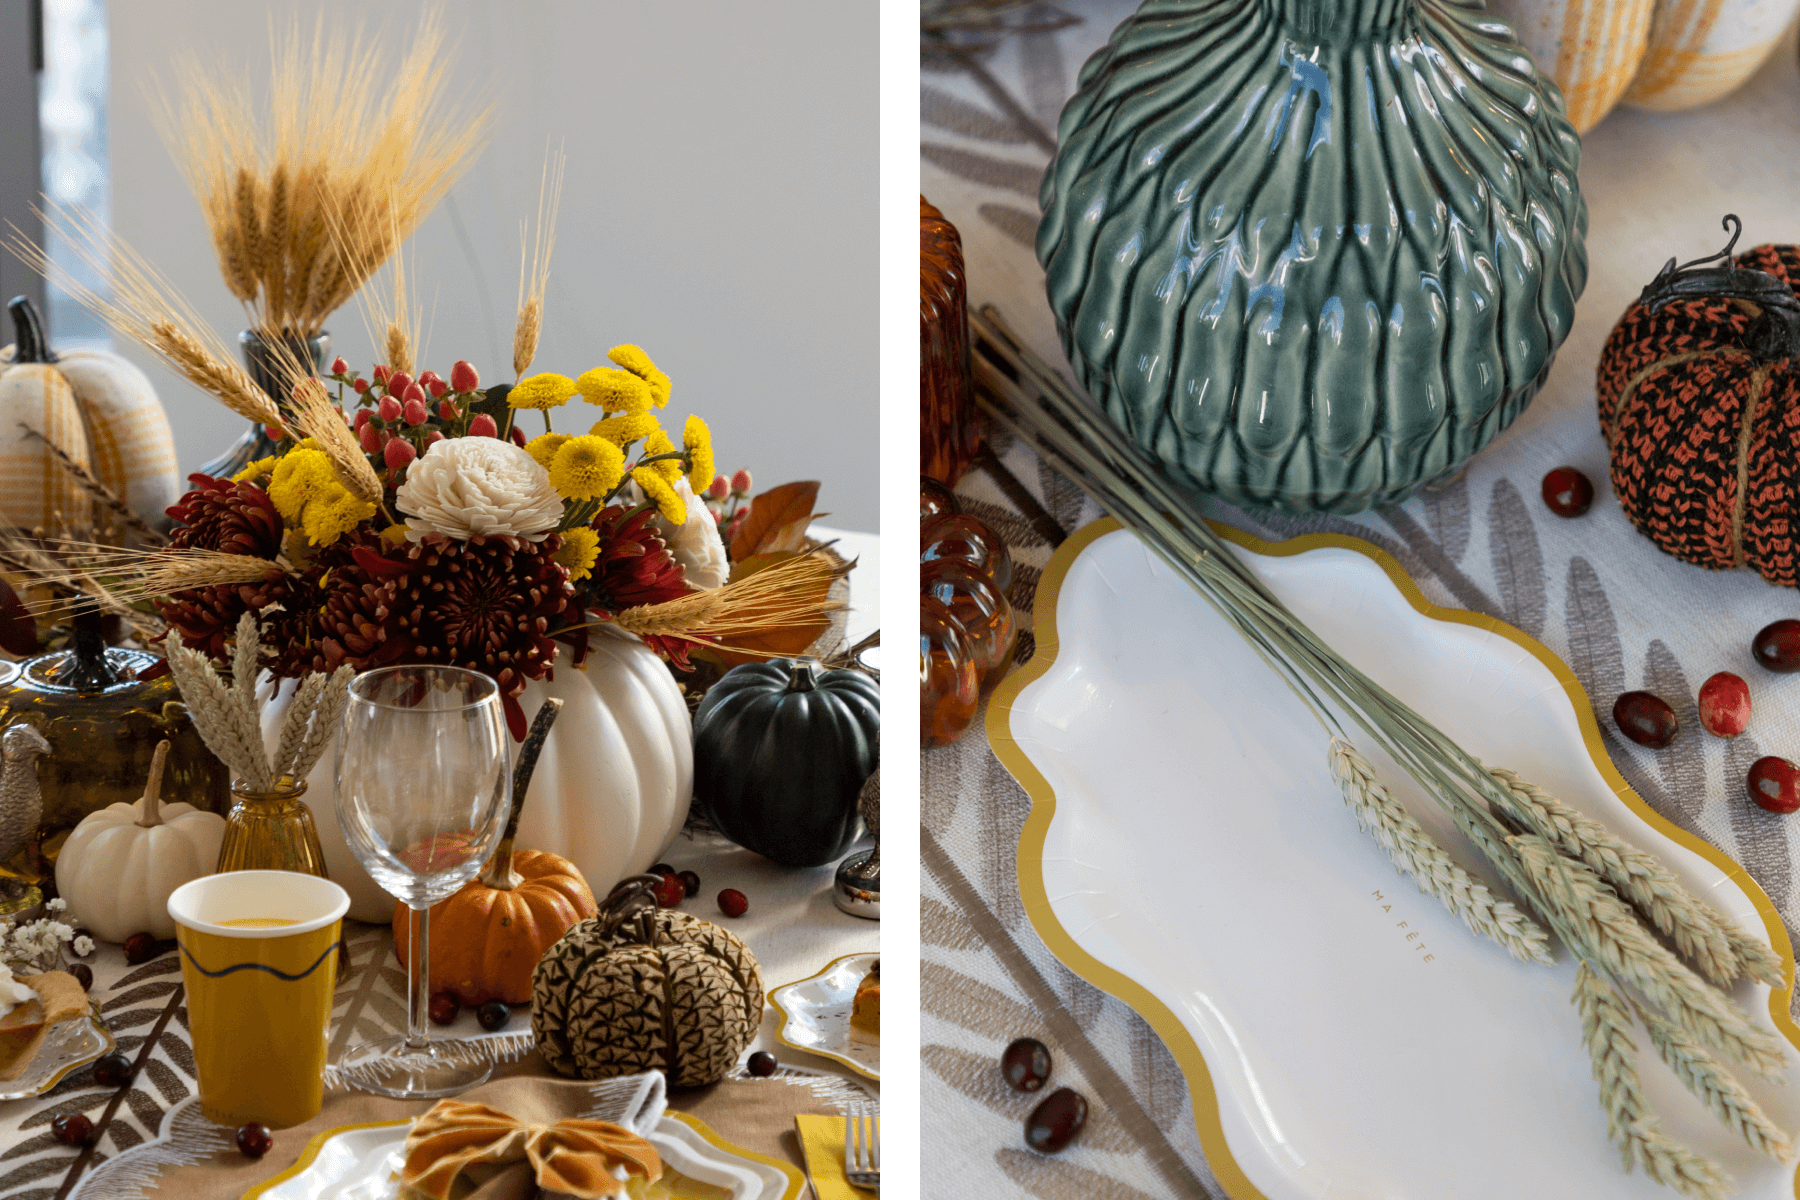 Left: A fall floral arrangement in a white pumpkin on a table with glasses and gourds. Right: Sprigs of wheat lie on a scalloped dish with autumnal decorations.